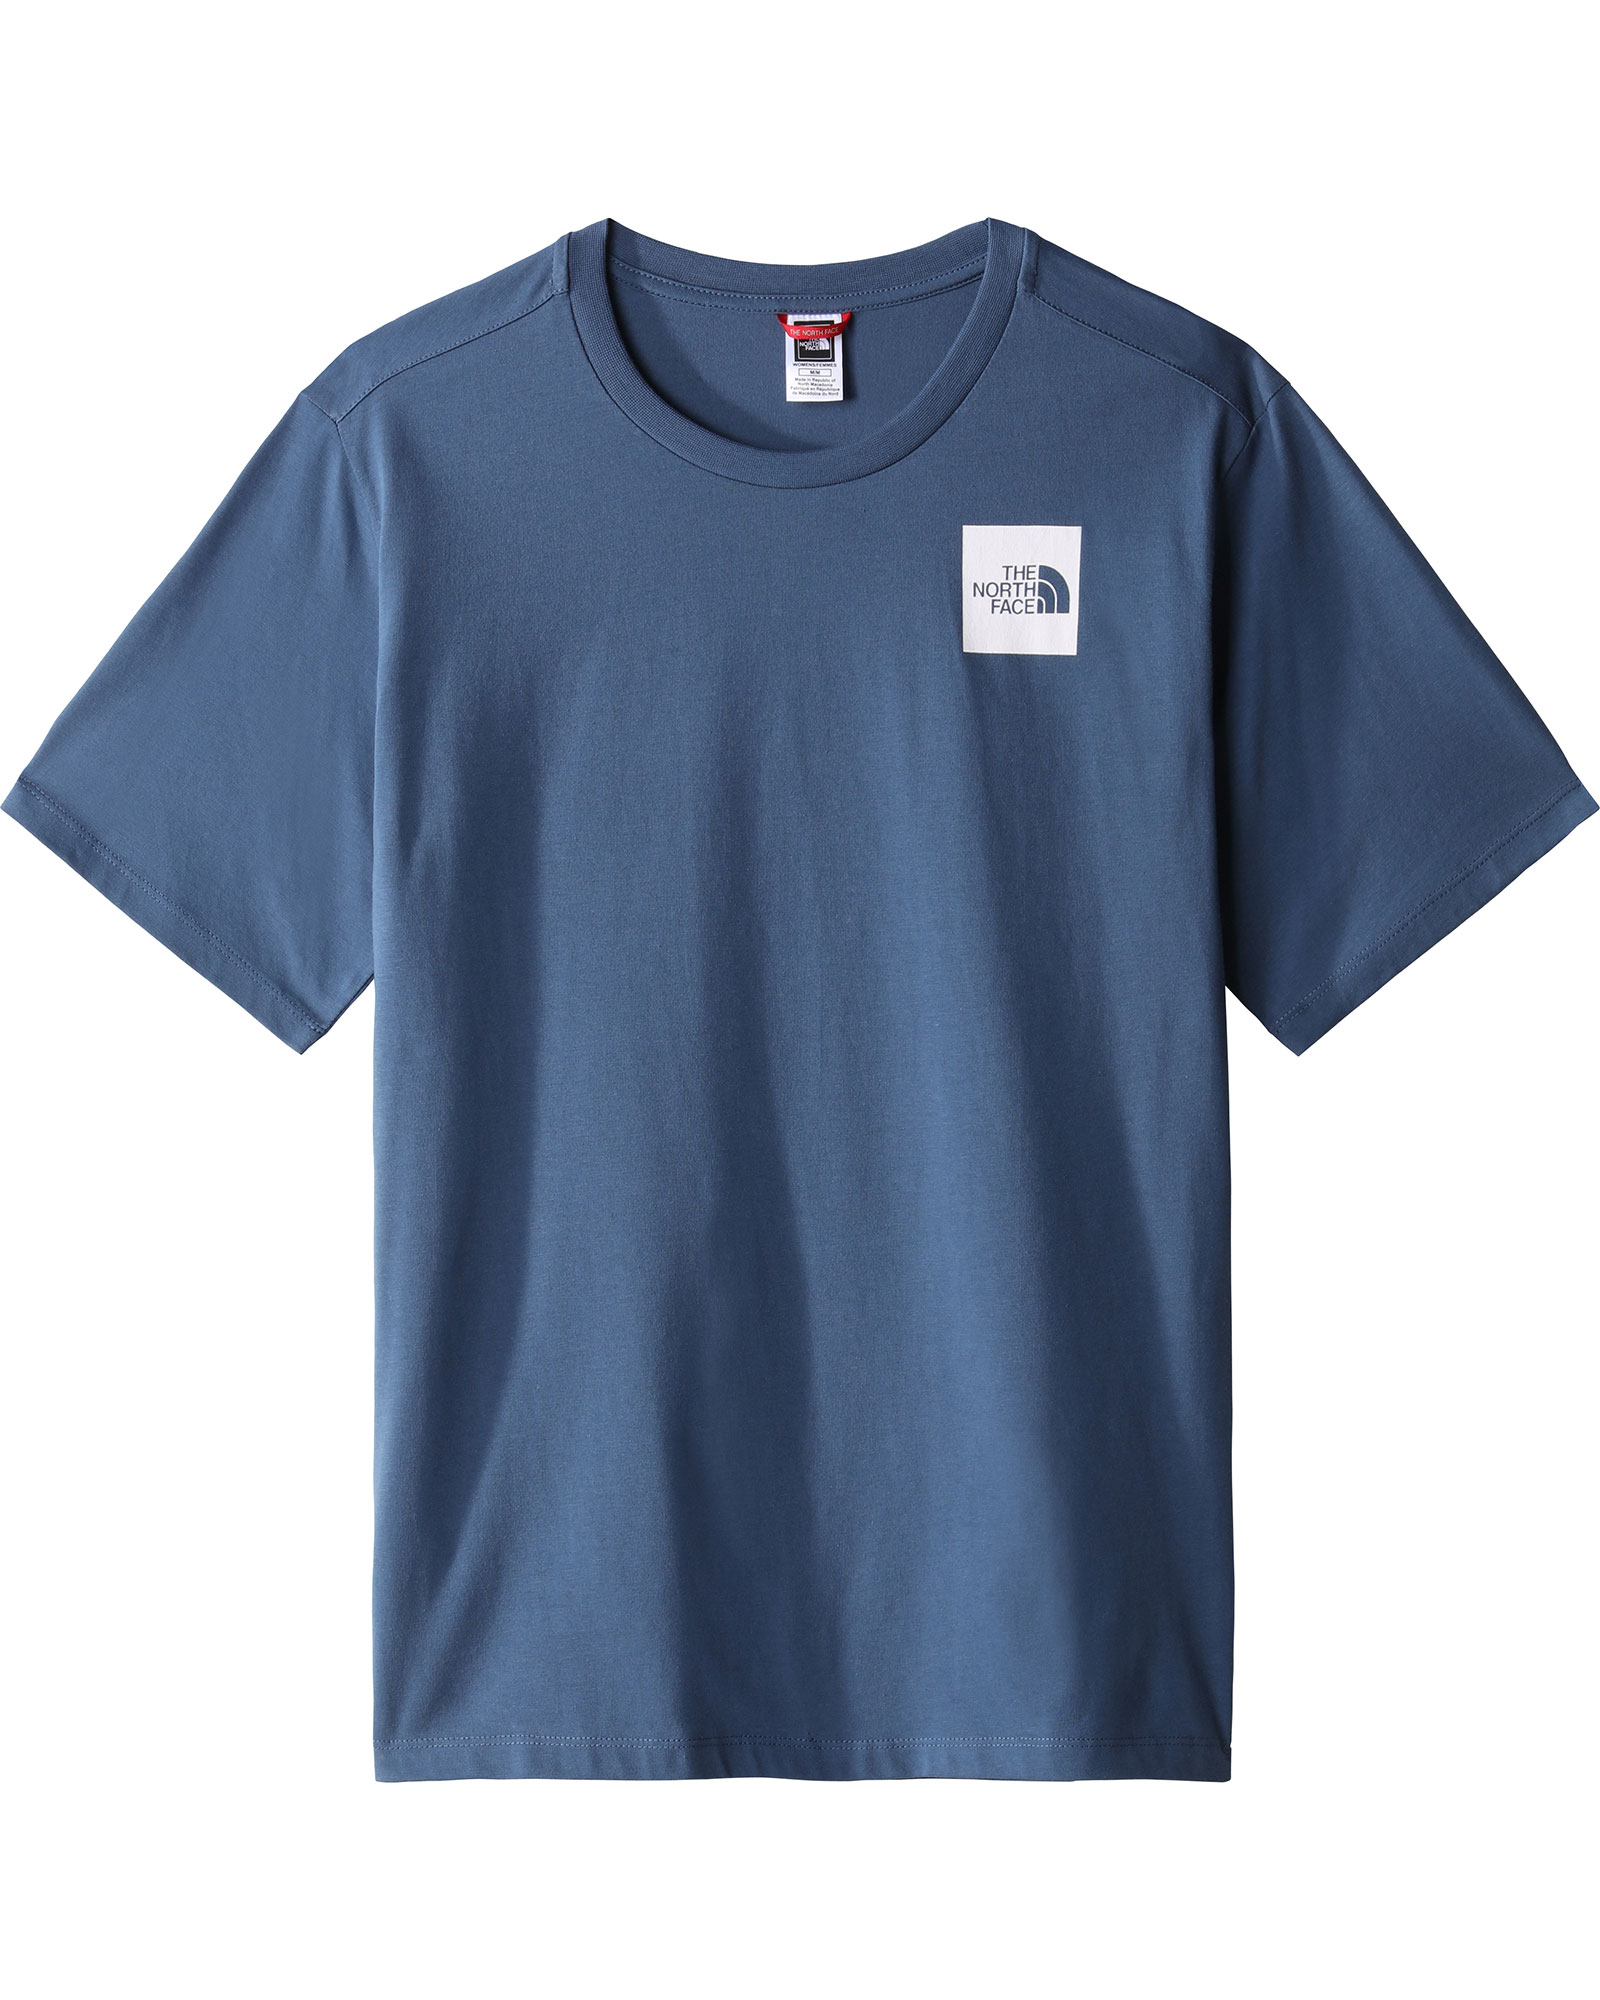 The North Face Women’s Relaxed Fine T Shirt - Shady Blue S